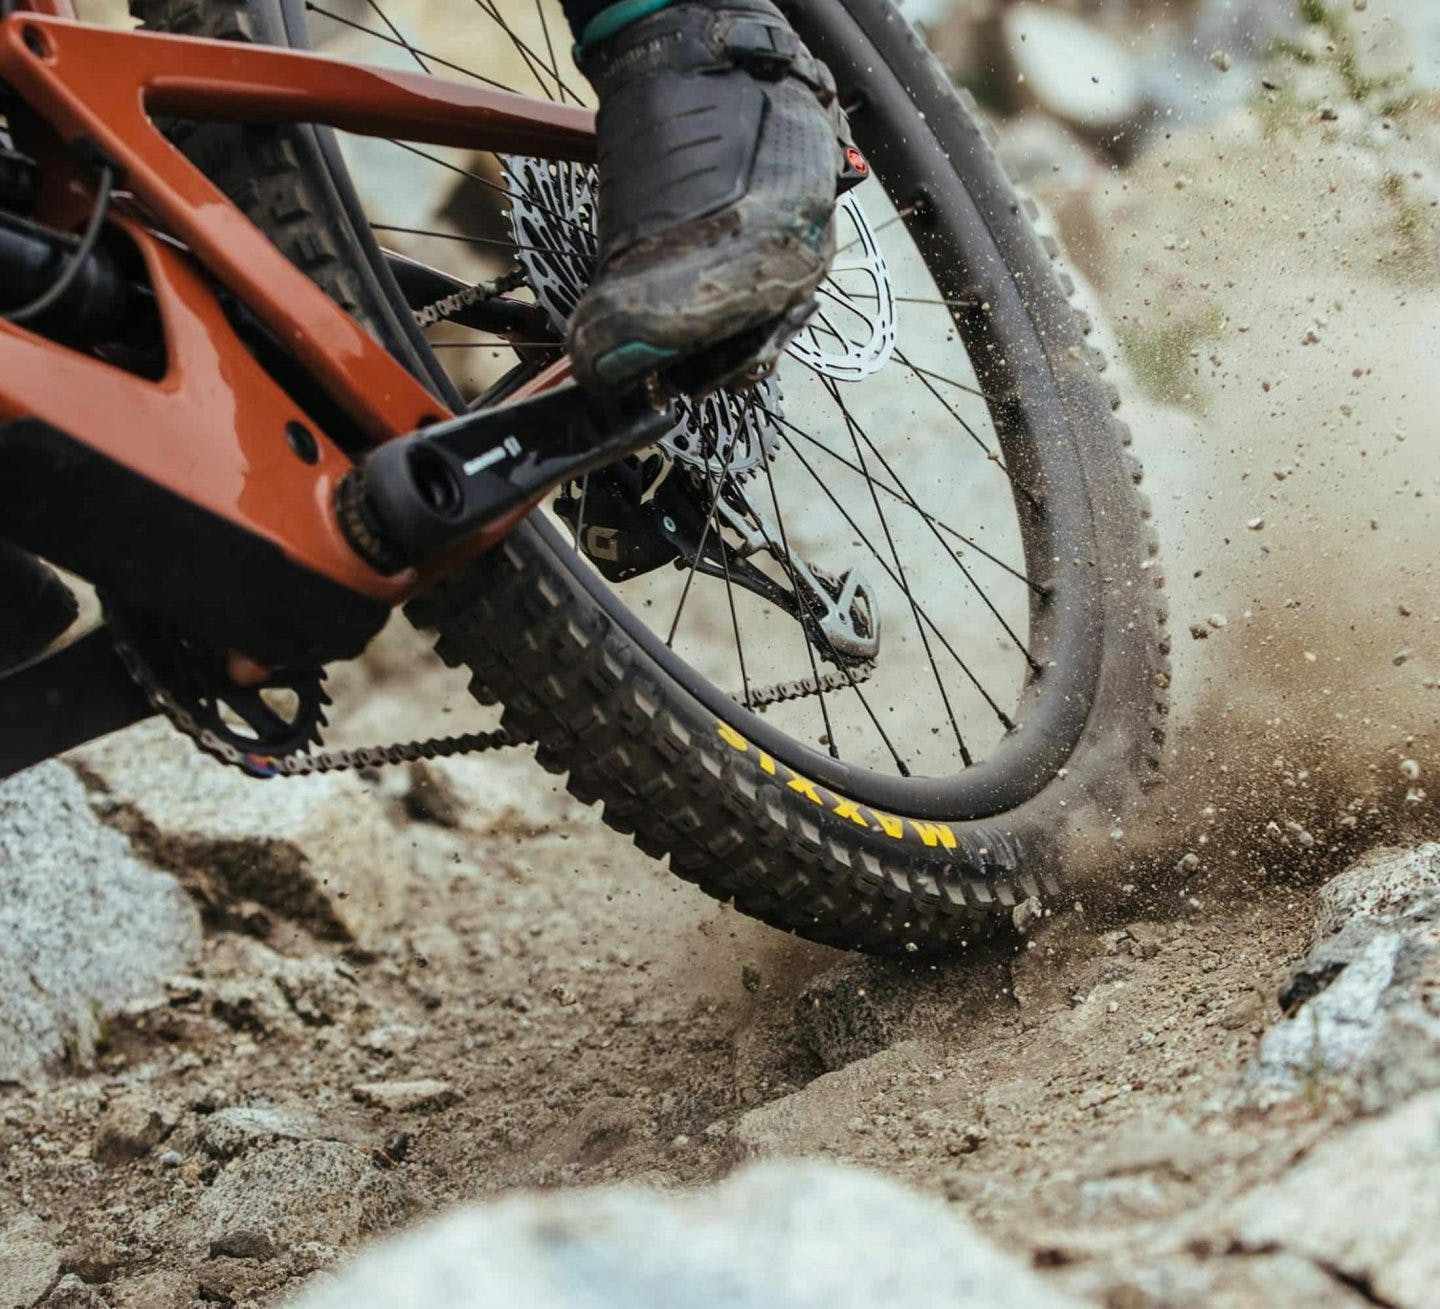 kicking up dirt and rocks from a maxxis tire on the Santa Cruz Bronson